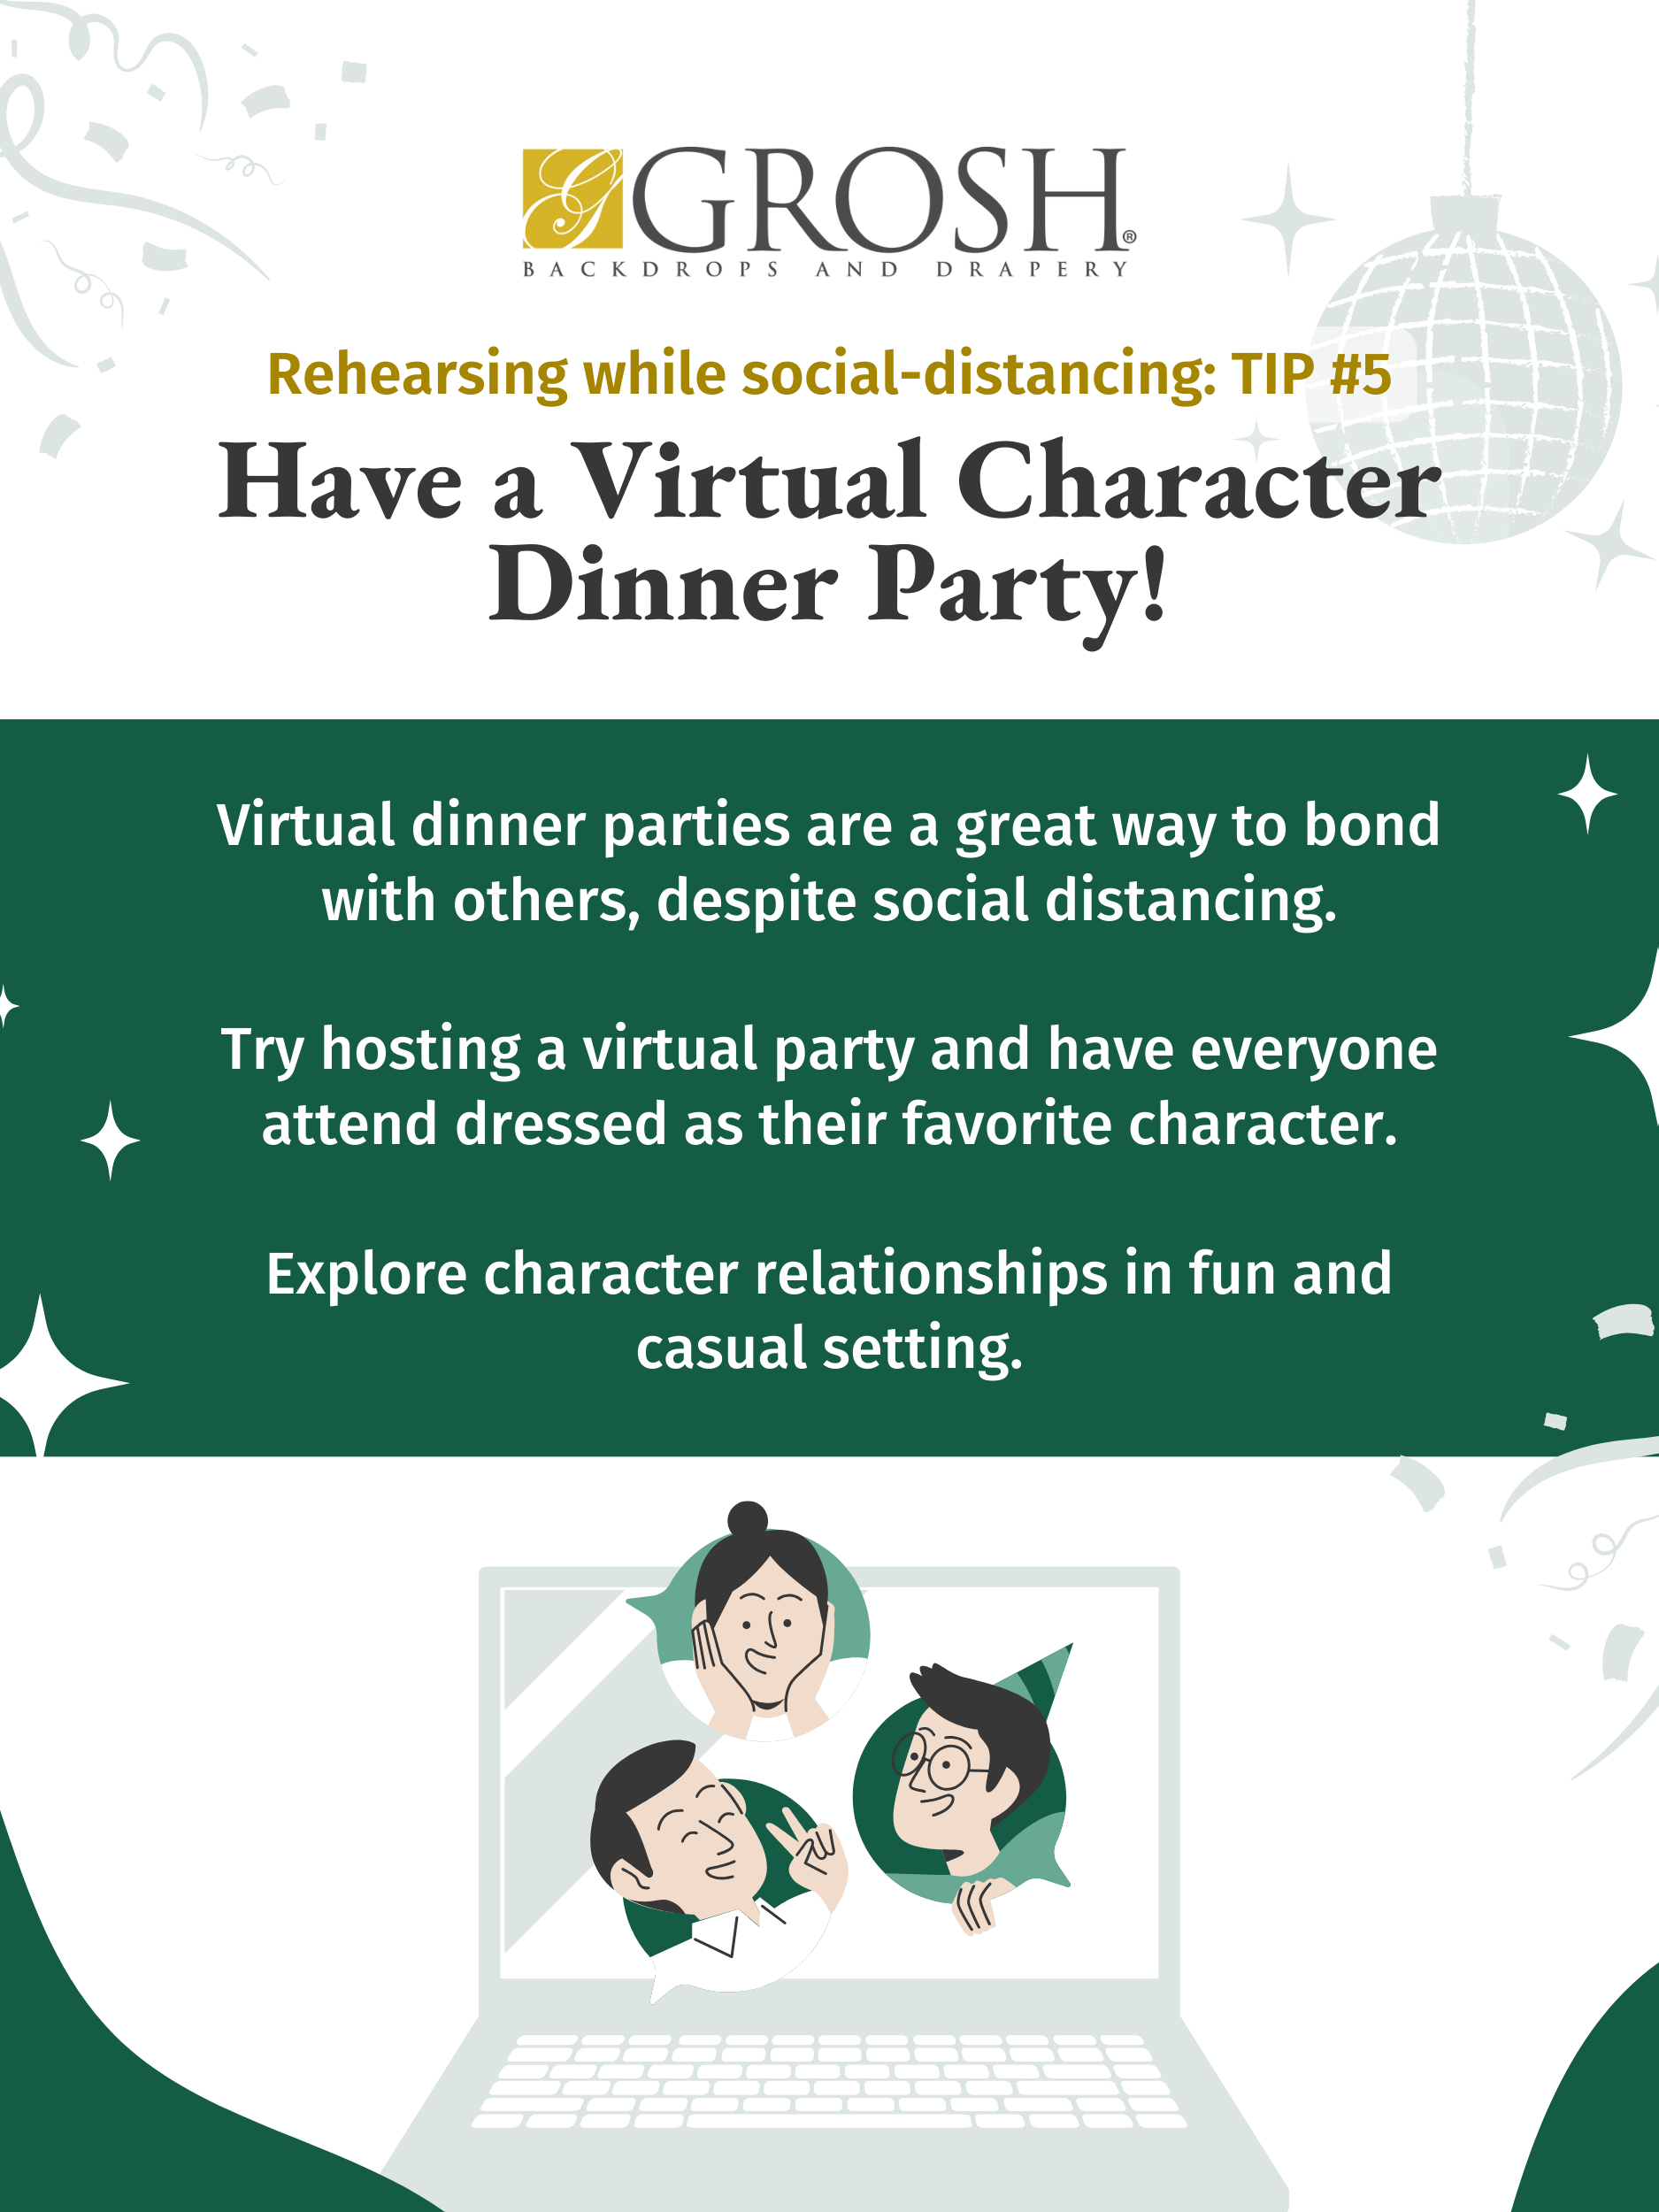 Have a Virtual Character Dinner Party